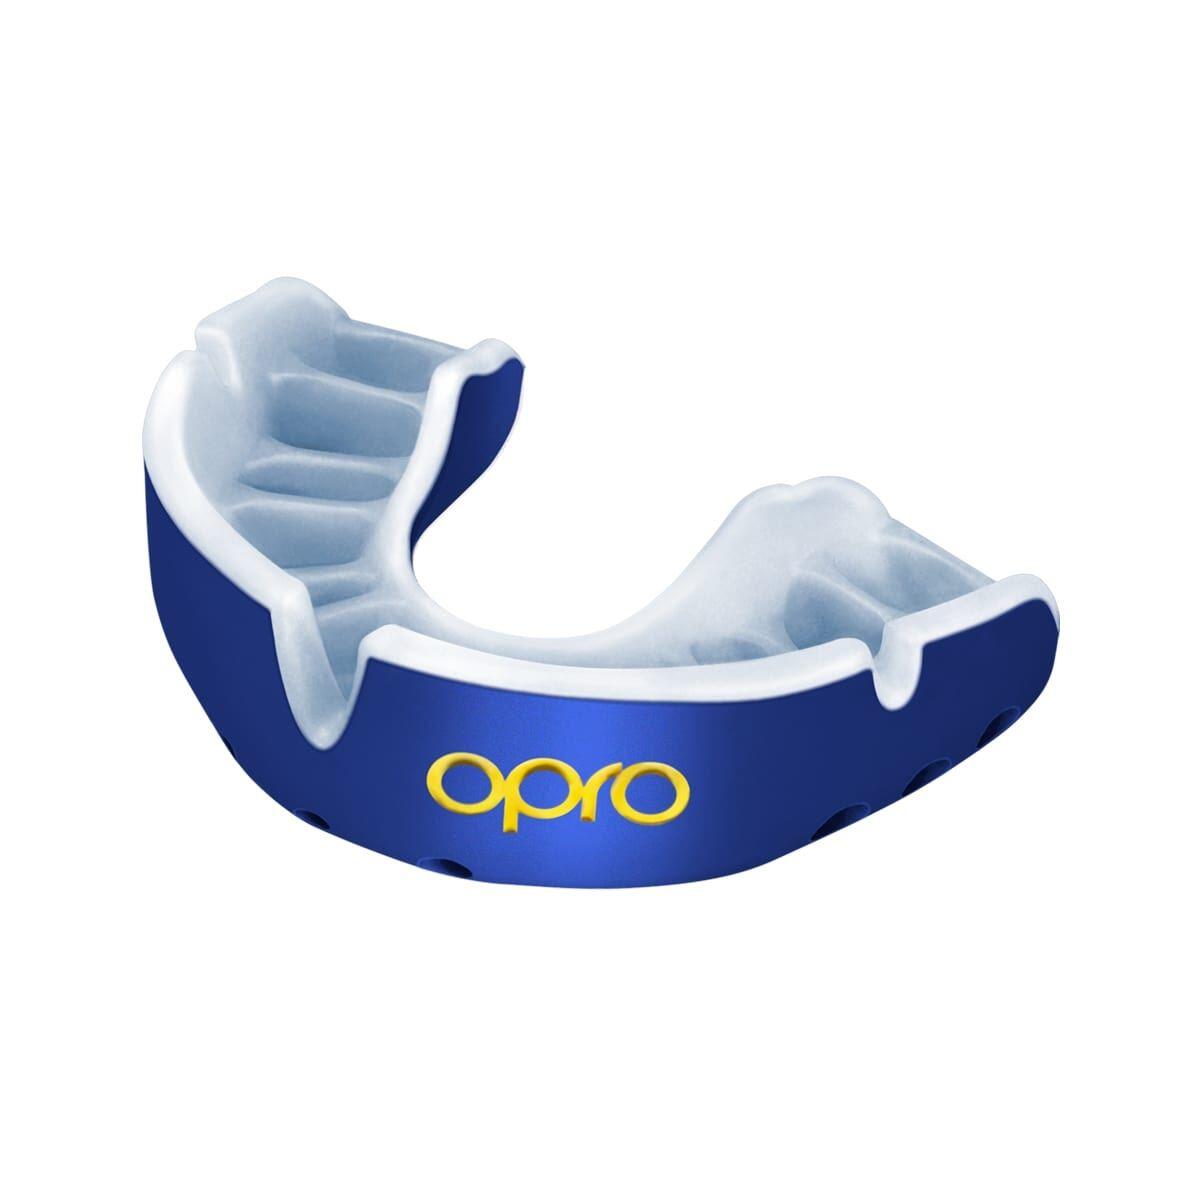 OPRO Blue/Pearl Opro Gold Self-Fit Mouth Guard